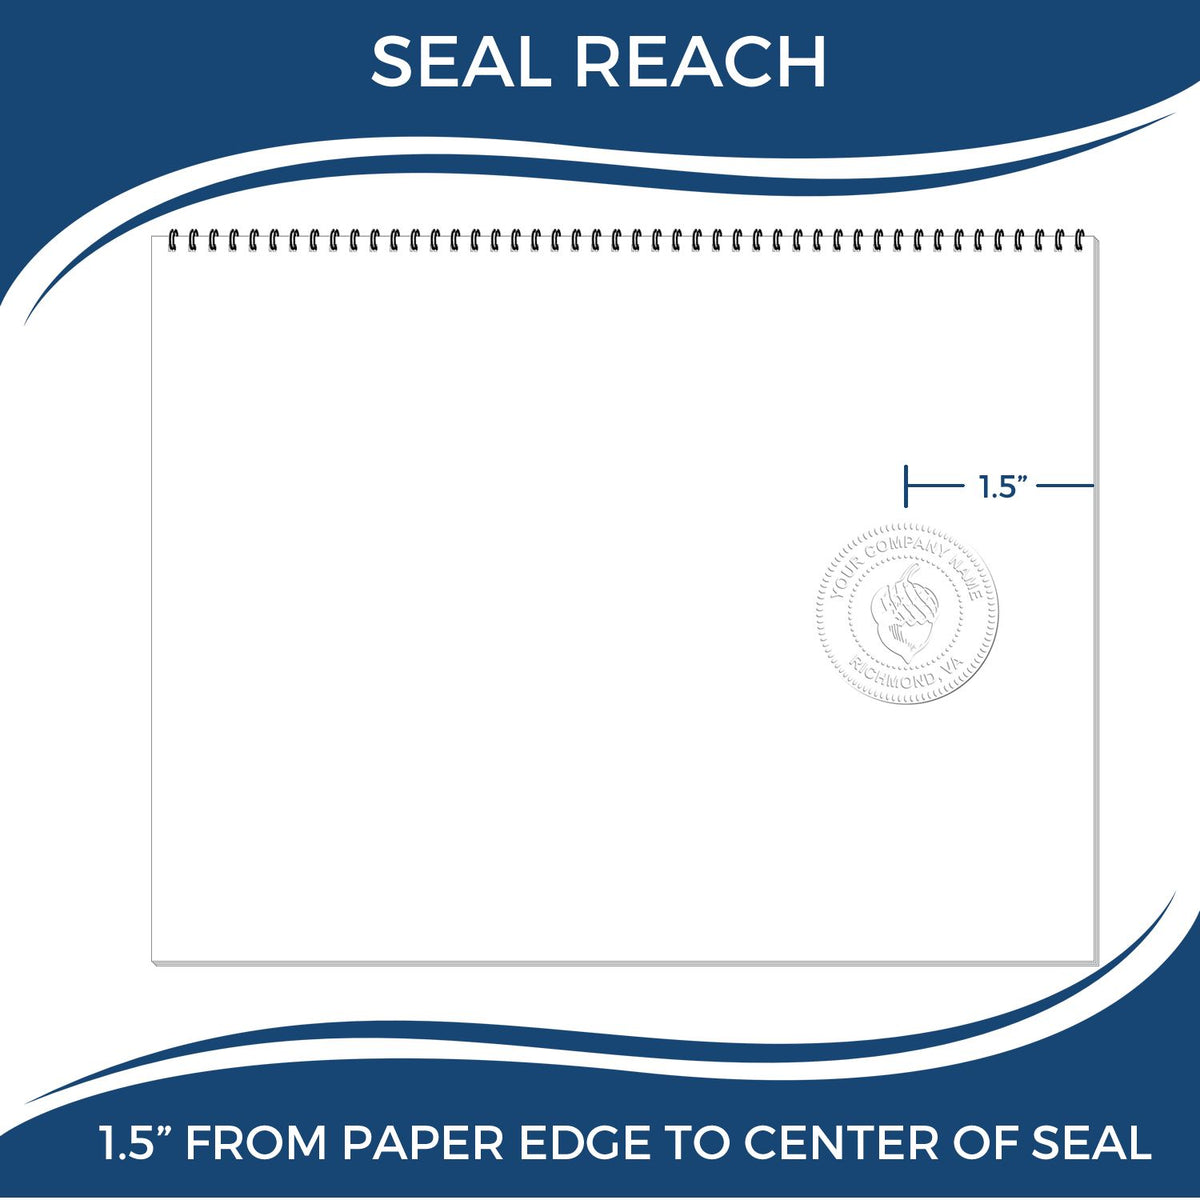 An infographic showing the seal reach which is represented by a ruler and a miniature seal image of the Hybrid Montana Land Surveyor Seal